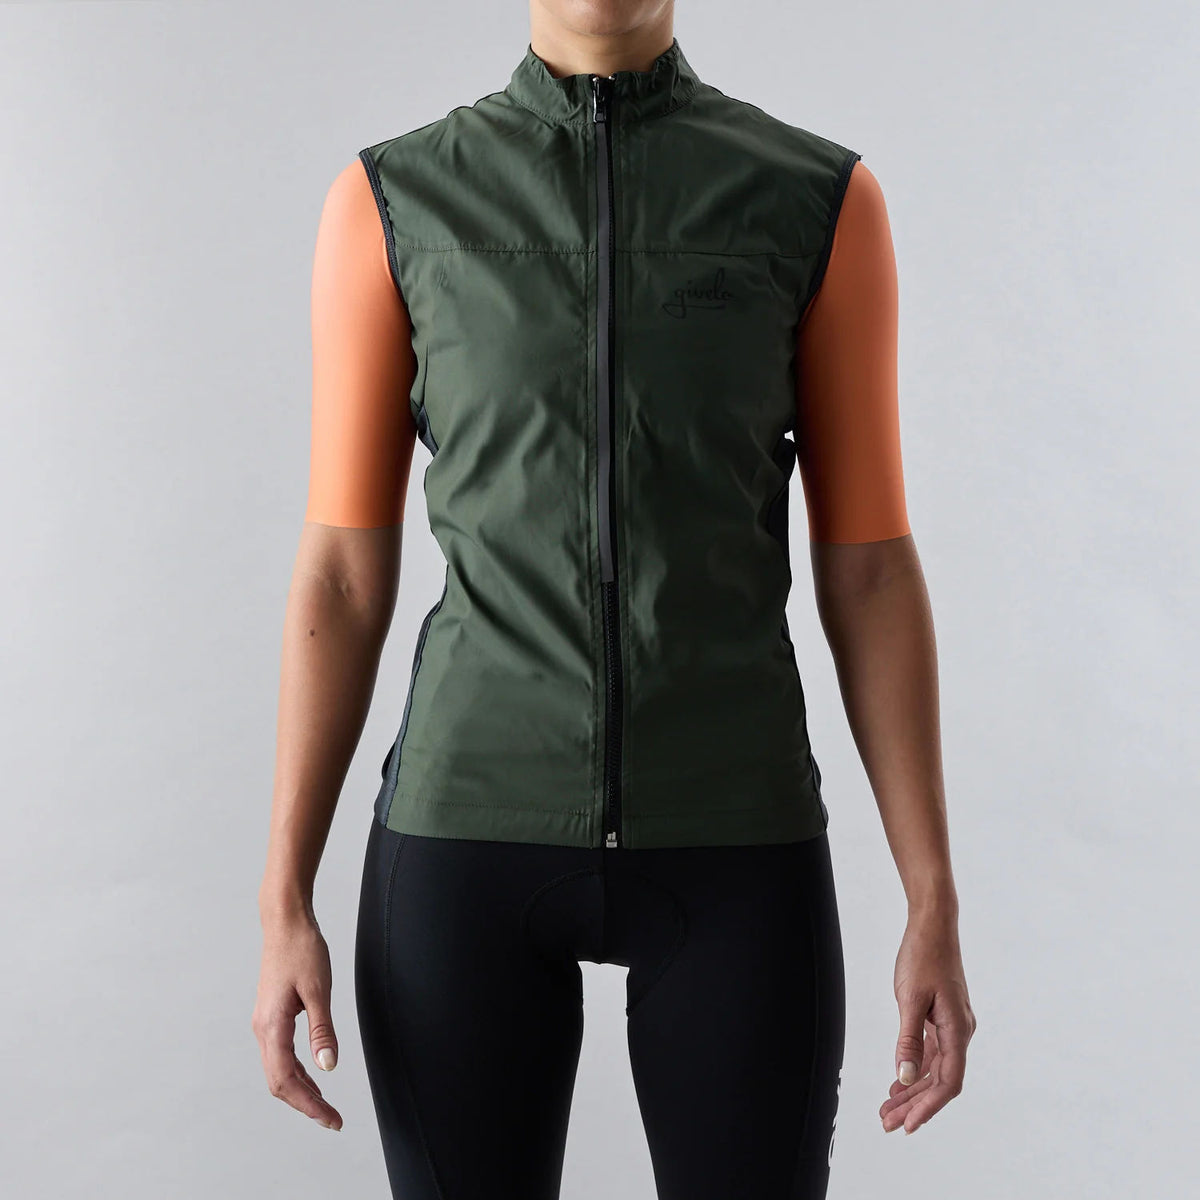 Givelo Quick-Free Gilet Military Green レディース サイクルジレ | GEARED